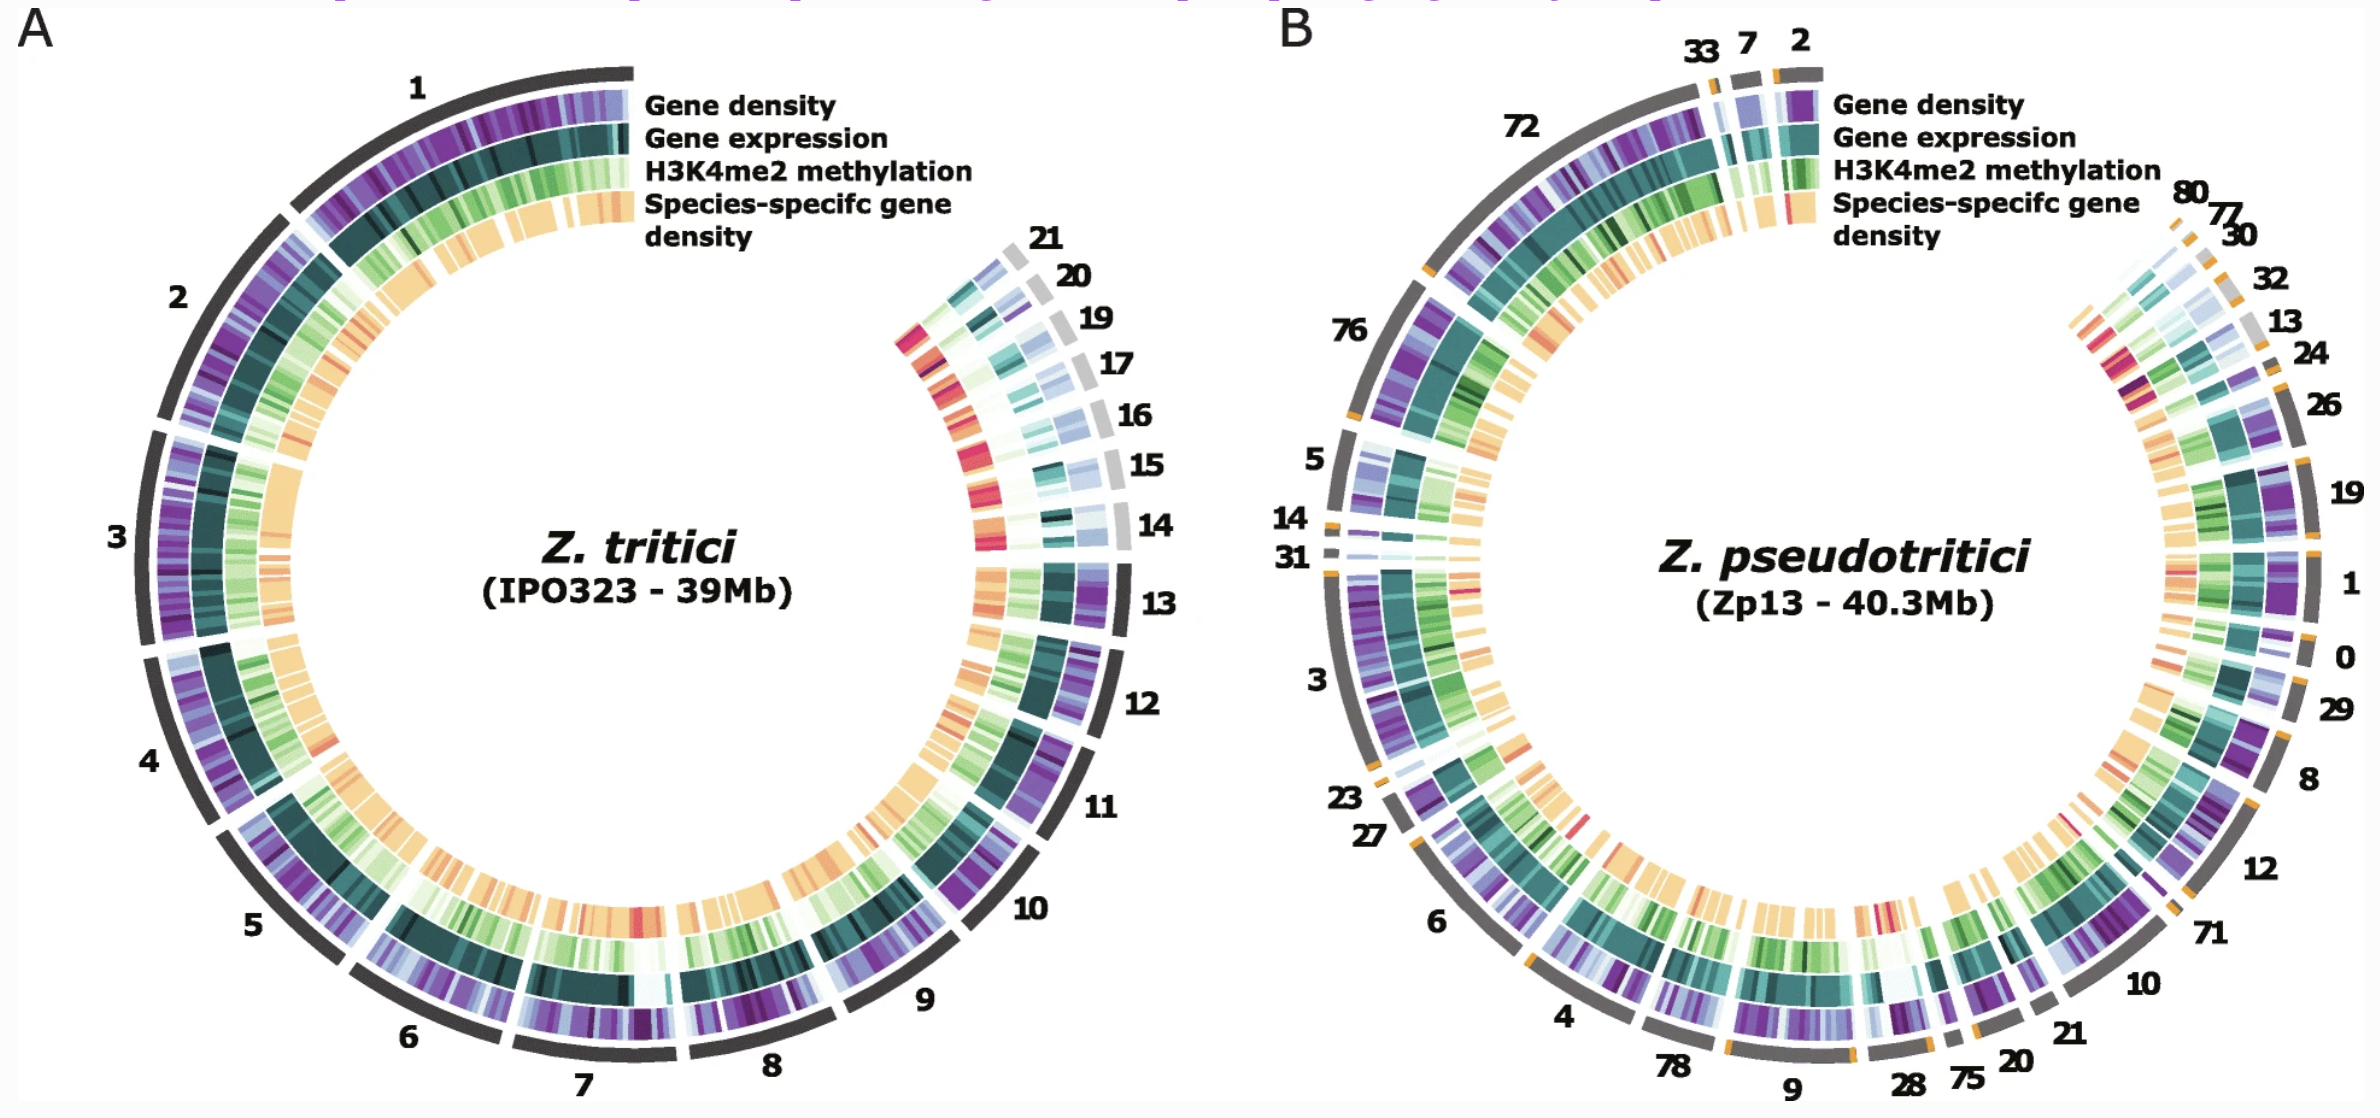 Circos plots from Z.tritici and Z.pseudotritici, showing compartmentalization at the genomic, transcriptomic and epigenomic levels